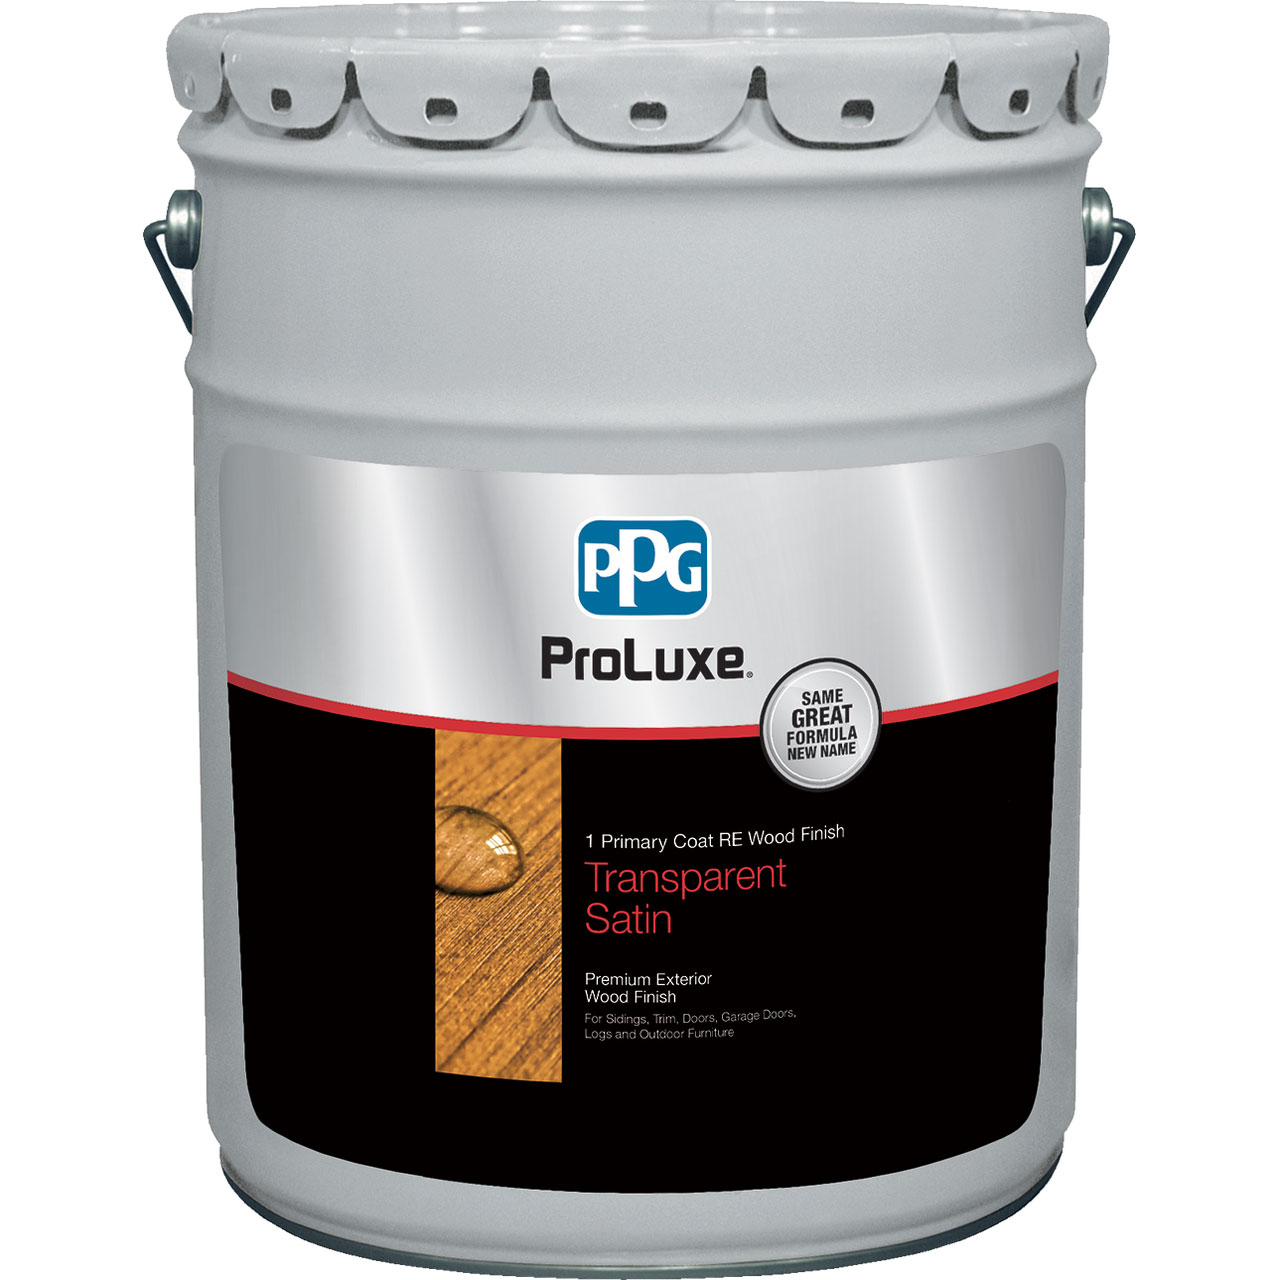 PPG Cetol 1 RE Wood Finish - Exterior Stain - 5 Gallons, Translucent - 078 Natural - Click Image to Close